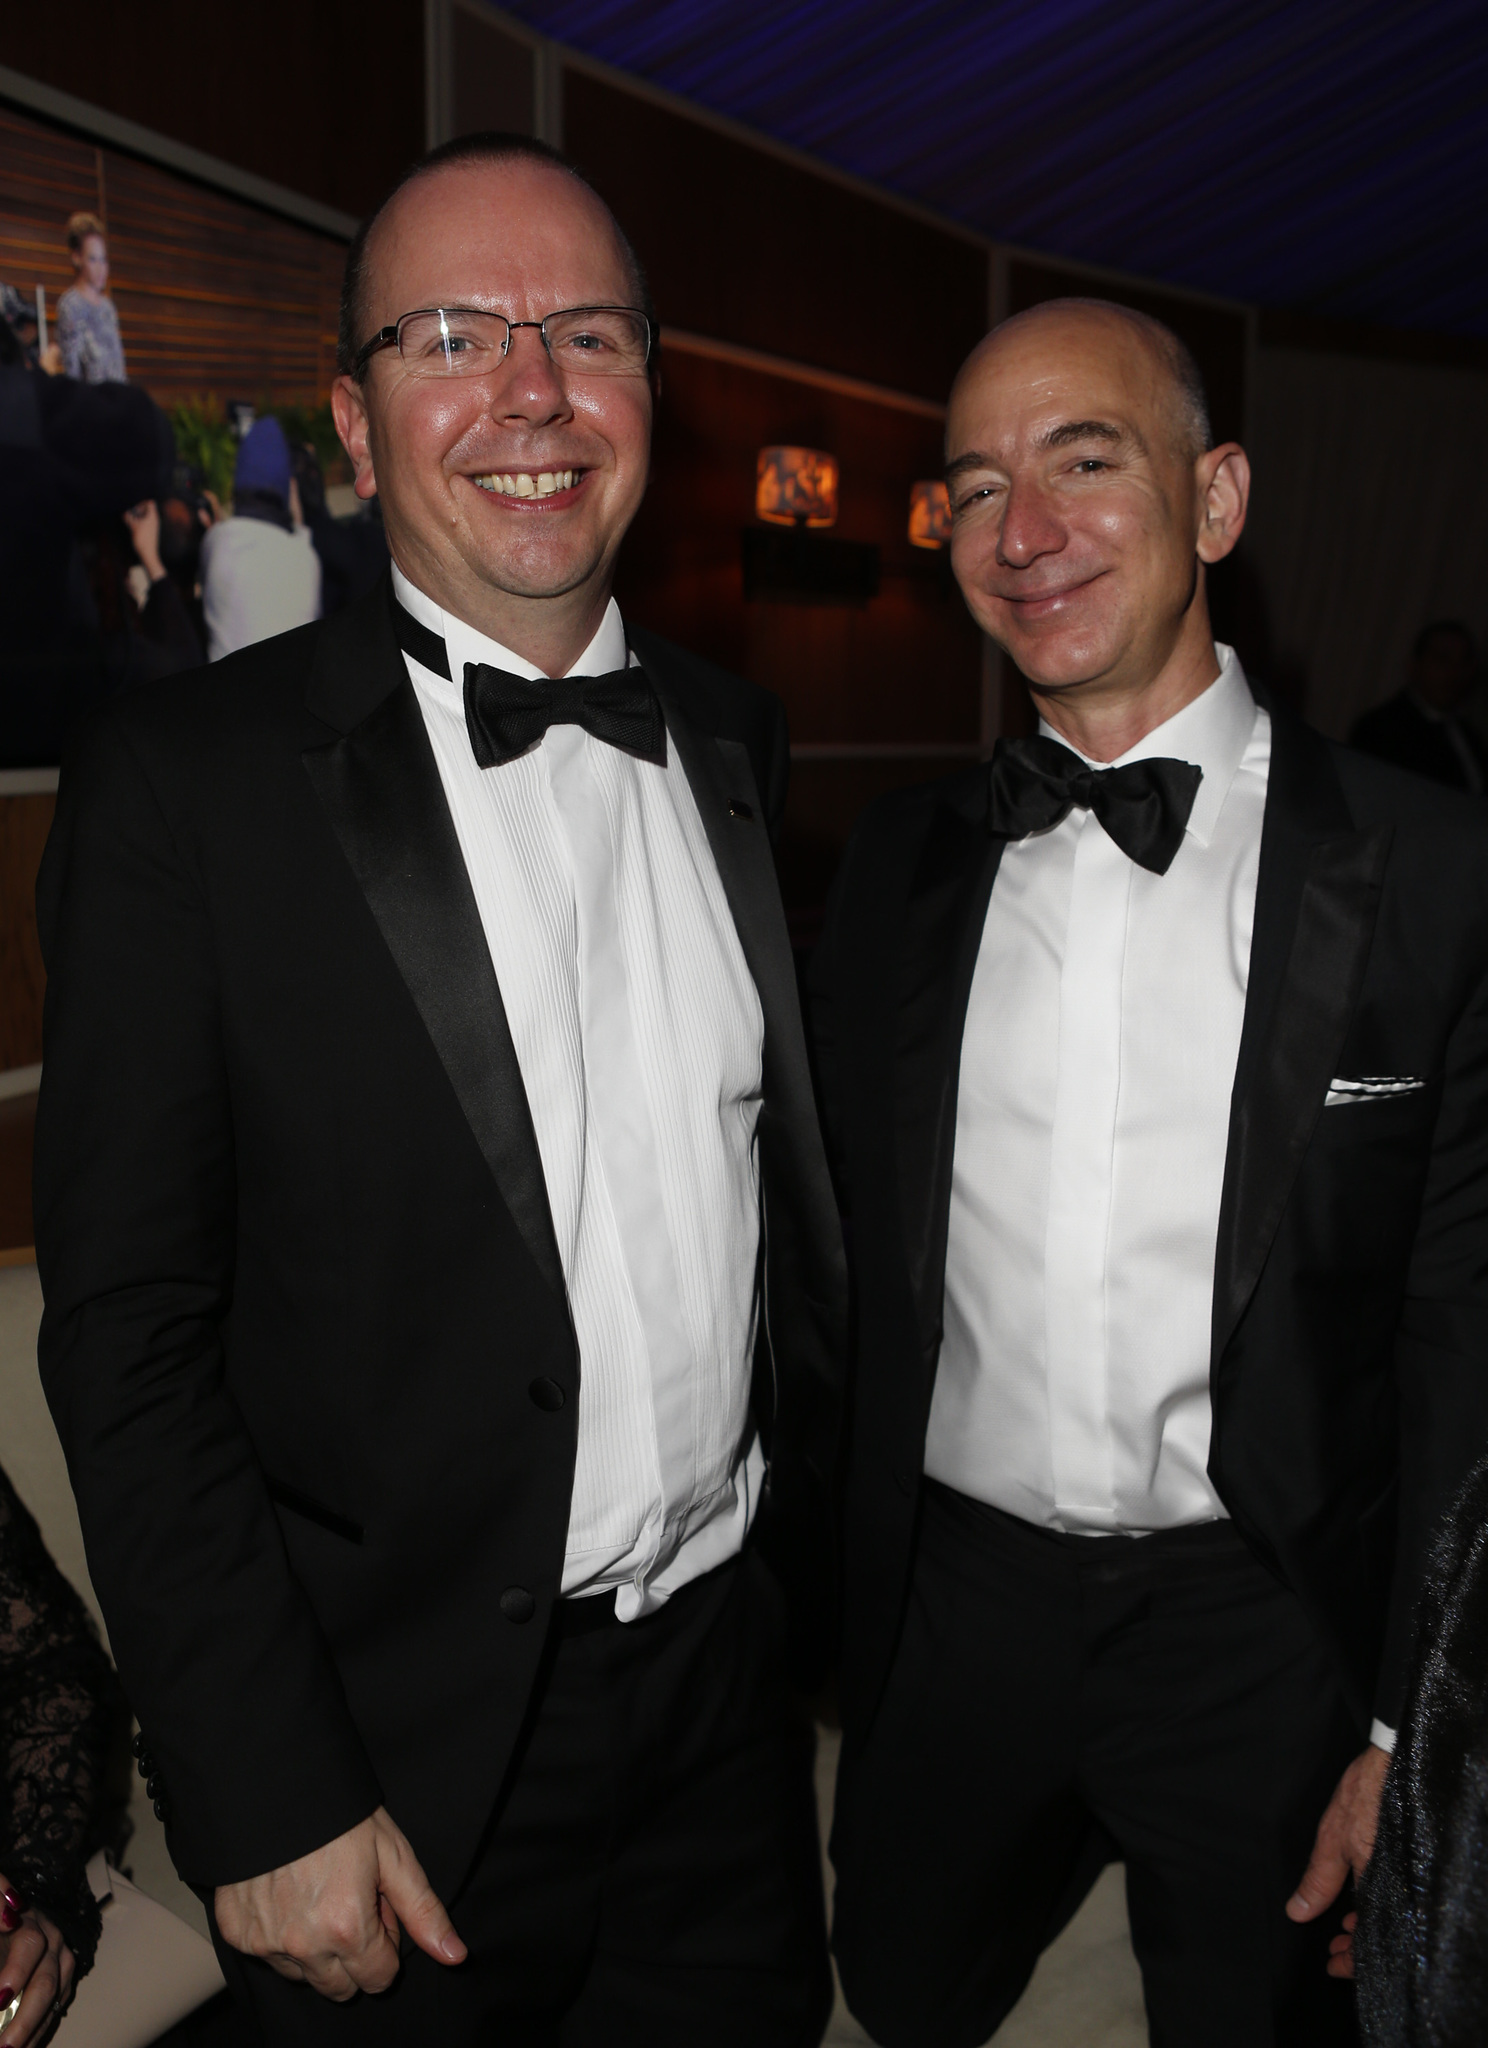 Col Needham and Jeff Bezos attend the 2014 Vanity Fair Oscar Party Hosted By Graydon Carter on March 2, 2014 in West Hollywood, California.